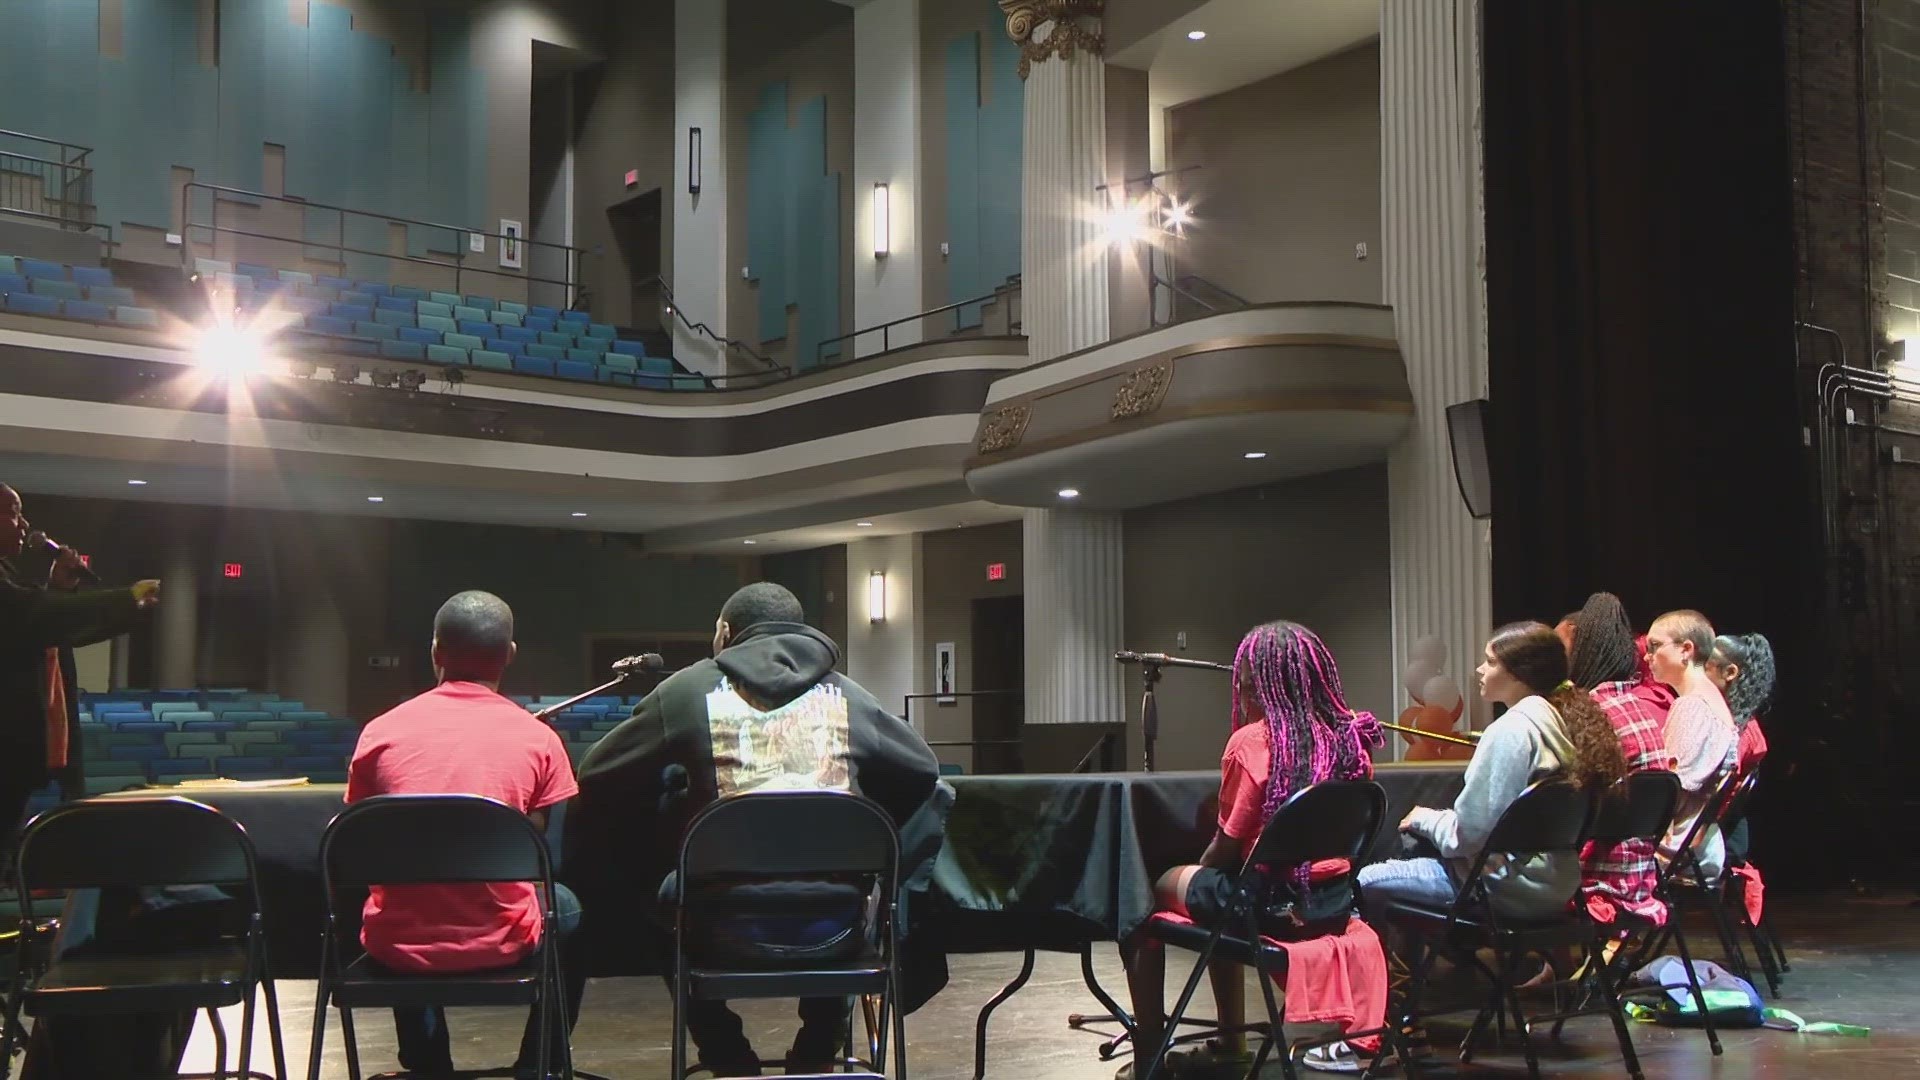 St. Louis student group sits down with school officials and talks gun violence solutions. This comes after several shootings involve teenage victims and suspects.